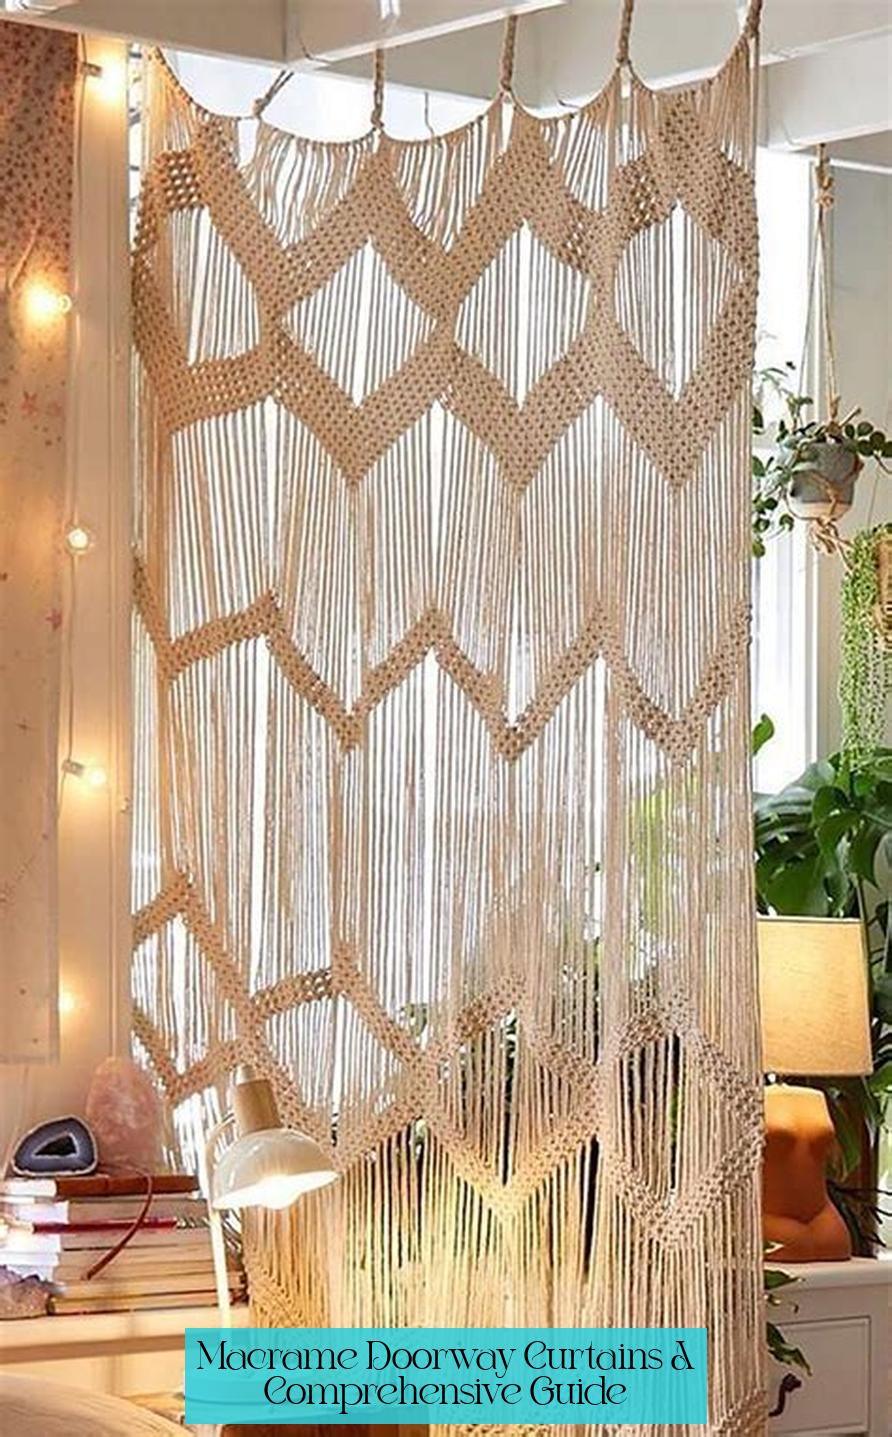 Macrame Doorway Curtains: A Comprehensive Guide